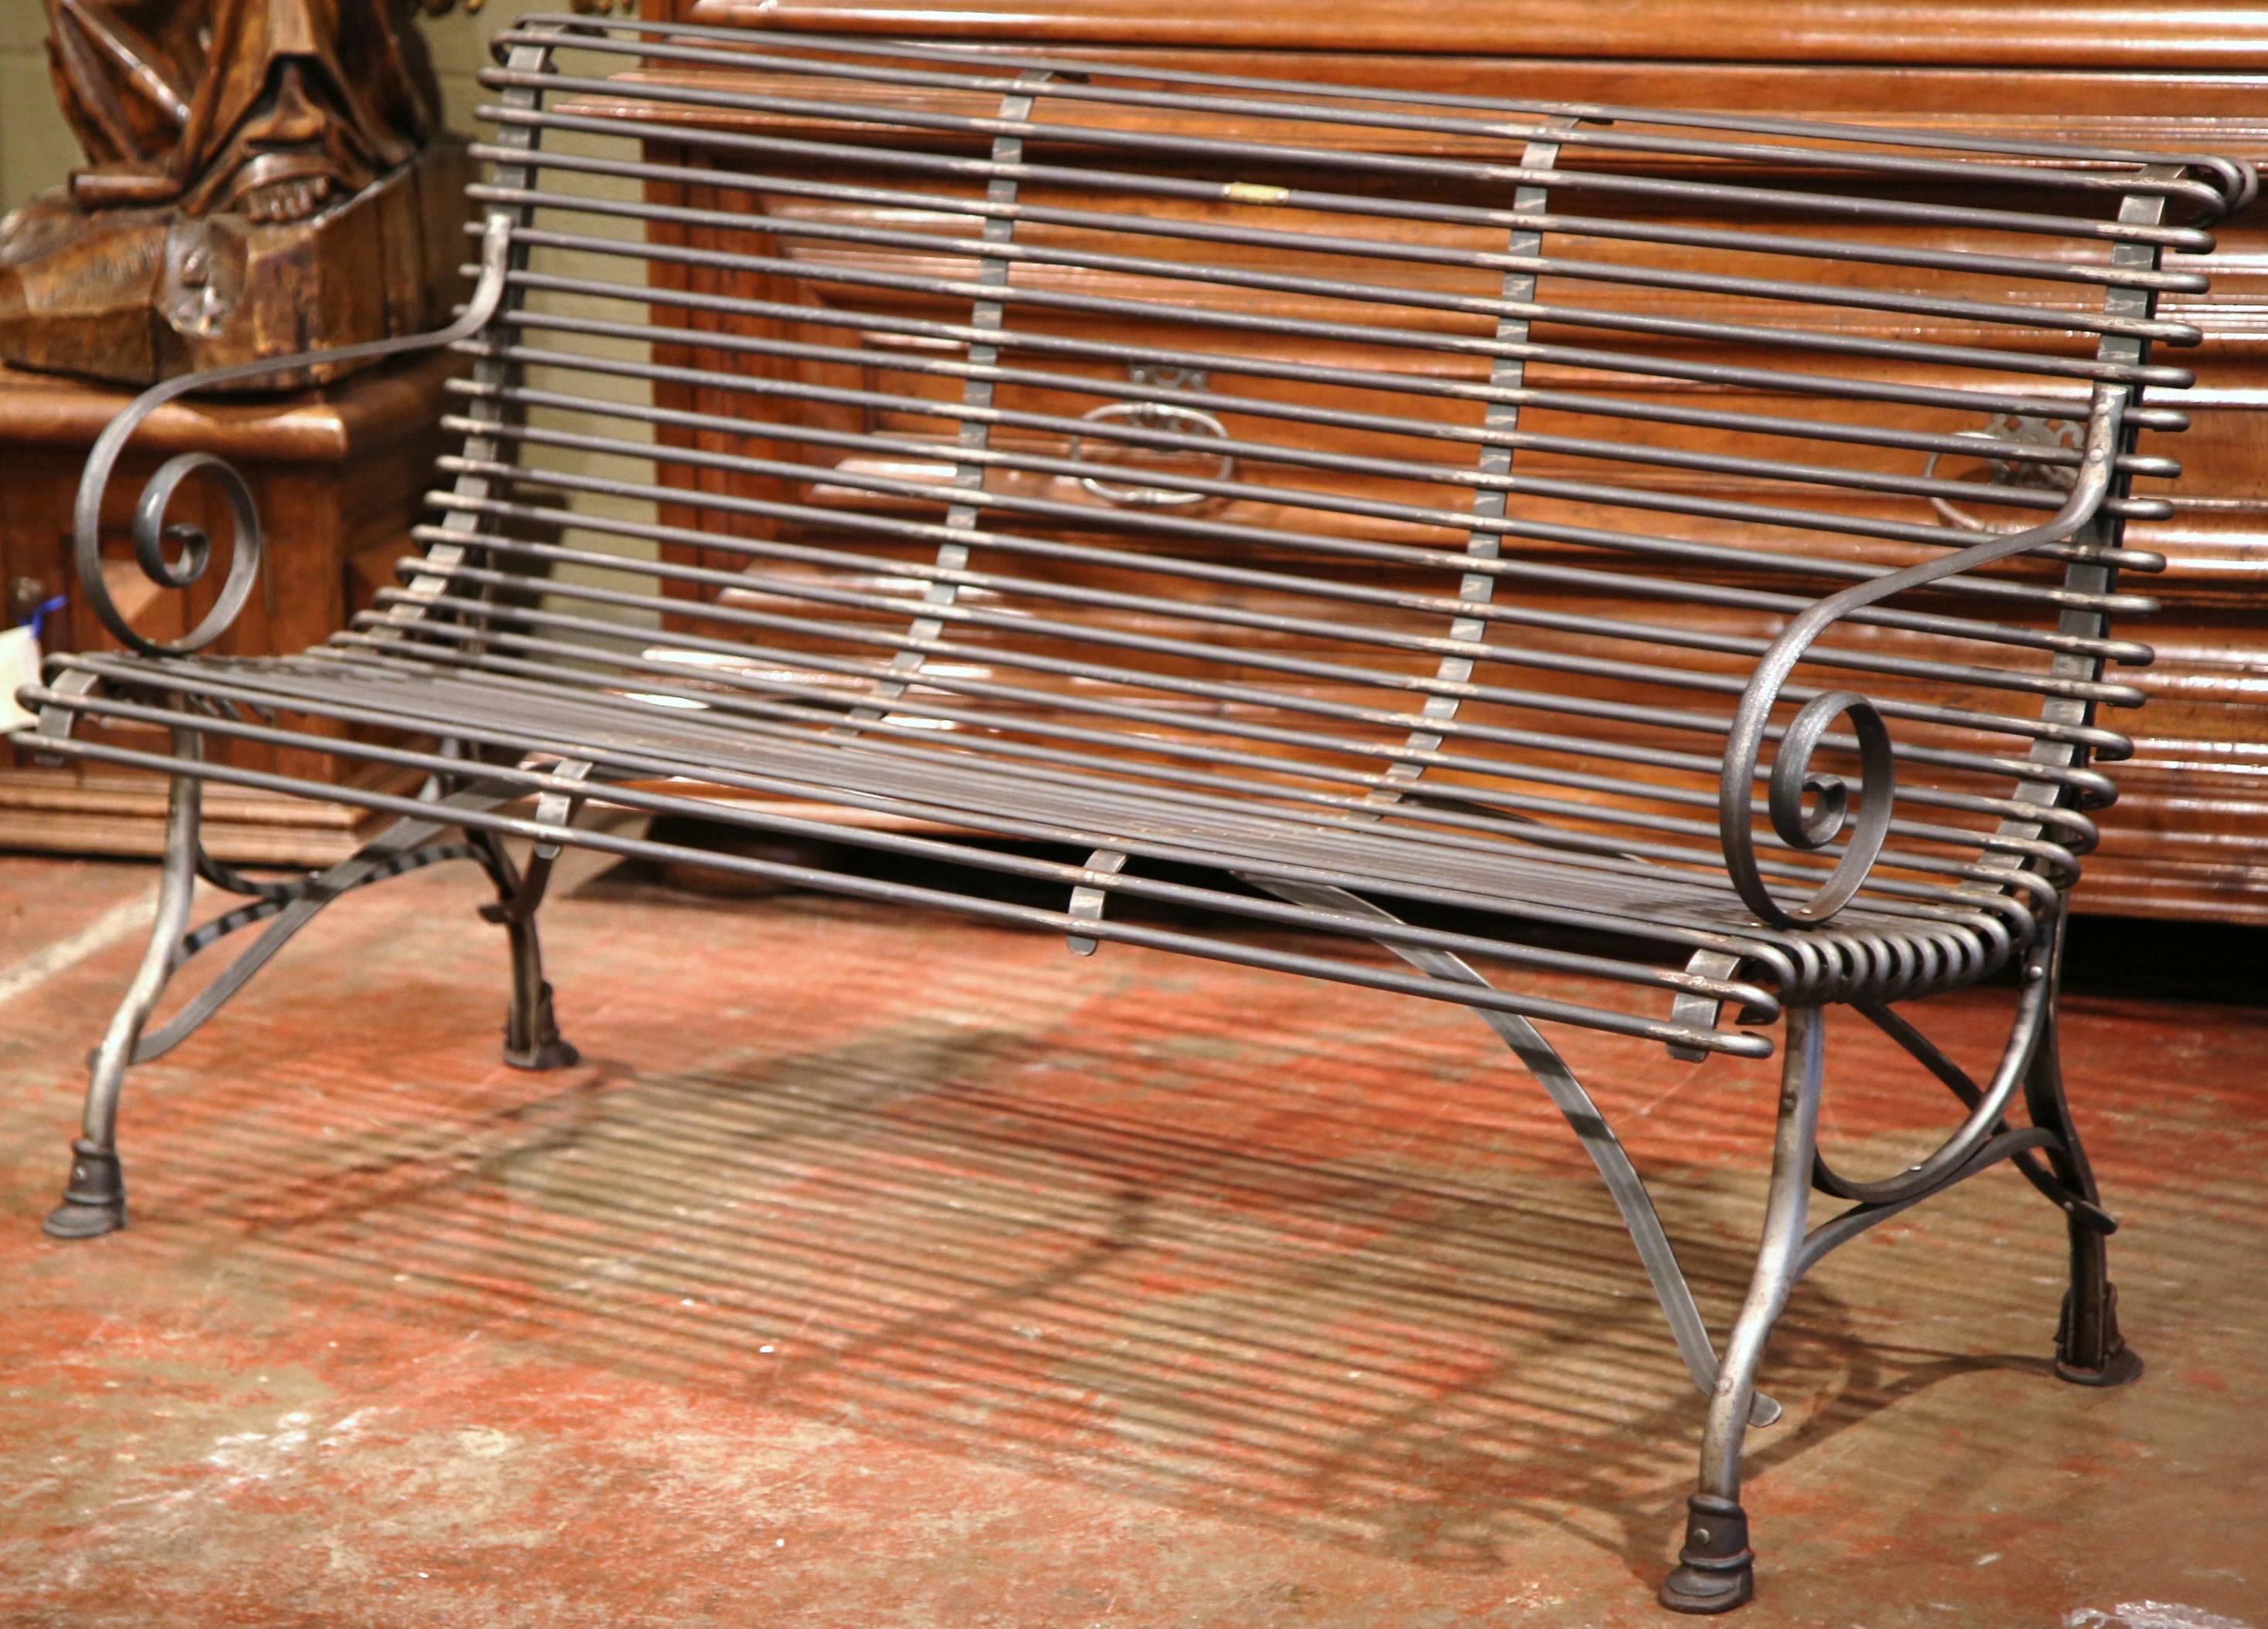 Add extra seating to a covered outdoor space with this elegant yet simple forged iron bench from France. Complete with a polished gun barrel finish, the three-seat bench has gracious lines, beautifully scrolled armrests, a curved back and four legs